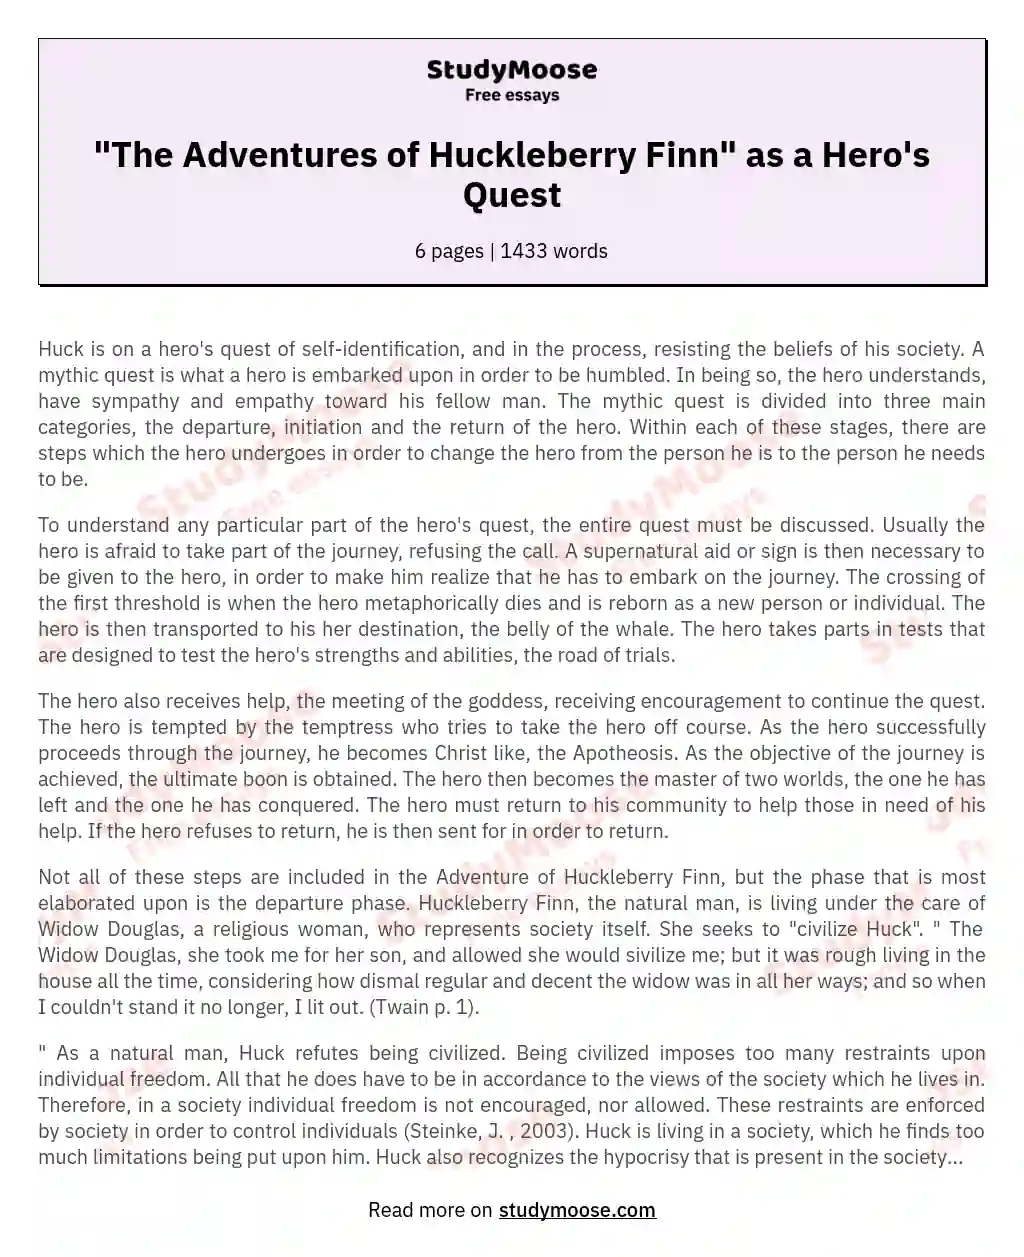 "The Adventures of Huckleberry Finn" as a Hero's Quest